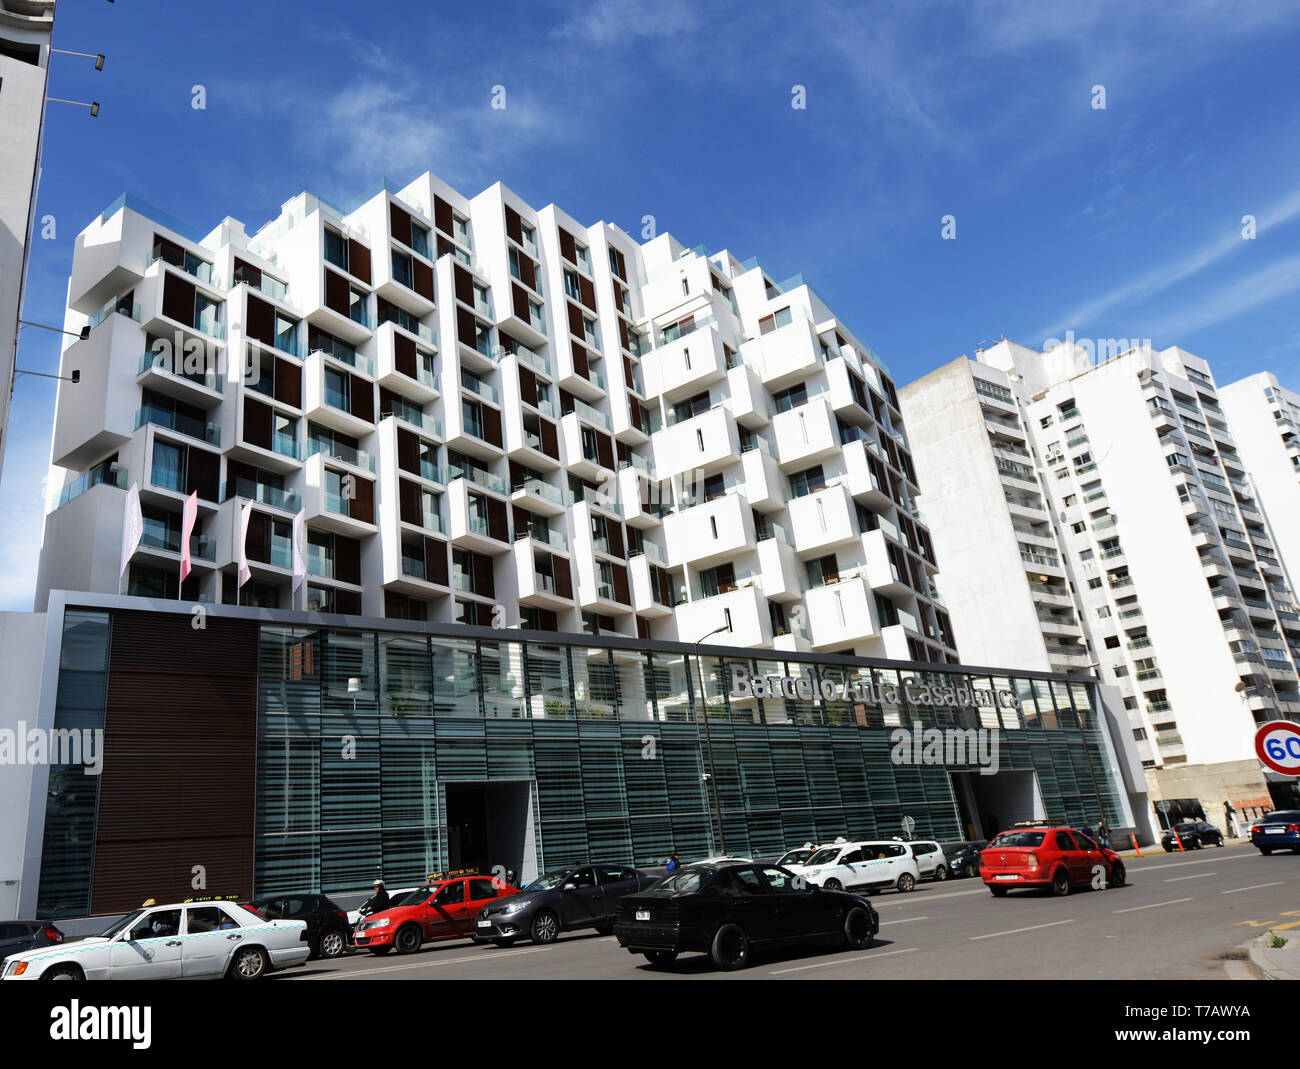 New modern buildings painted in the Iconic white color of Casablanca. Stock Photo